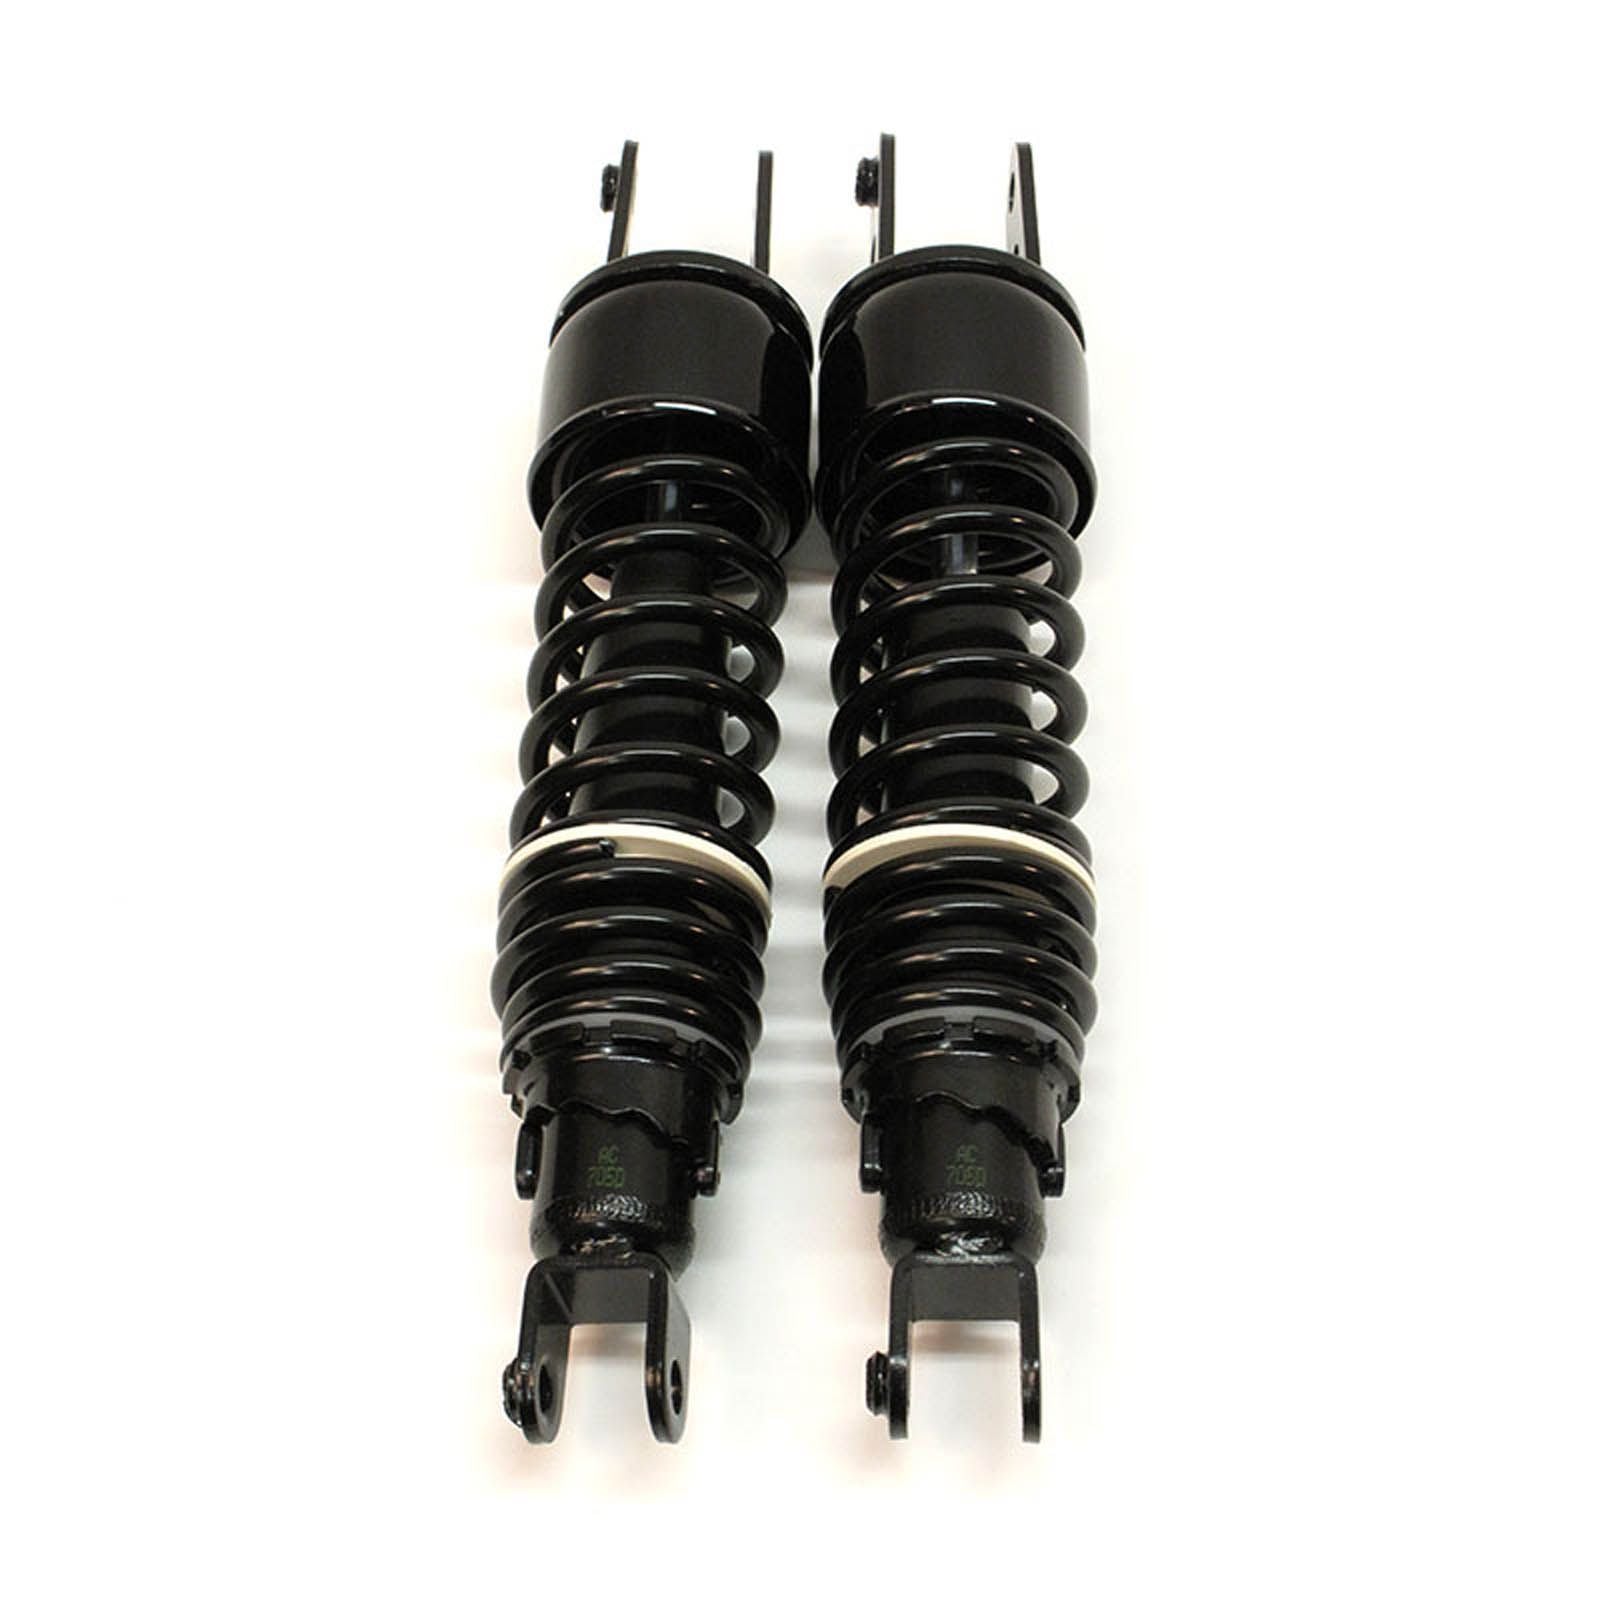 New WHITES Shock Absorber - Rear #4 365mm C (Pair) #SA9004